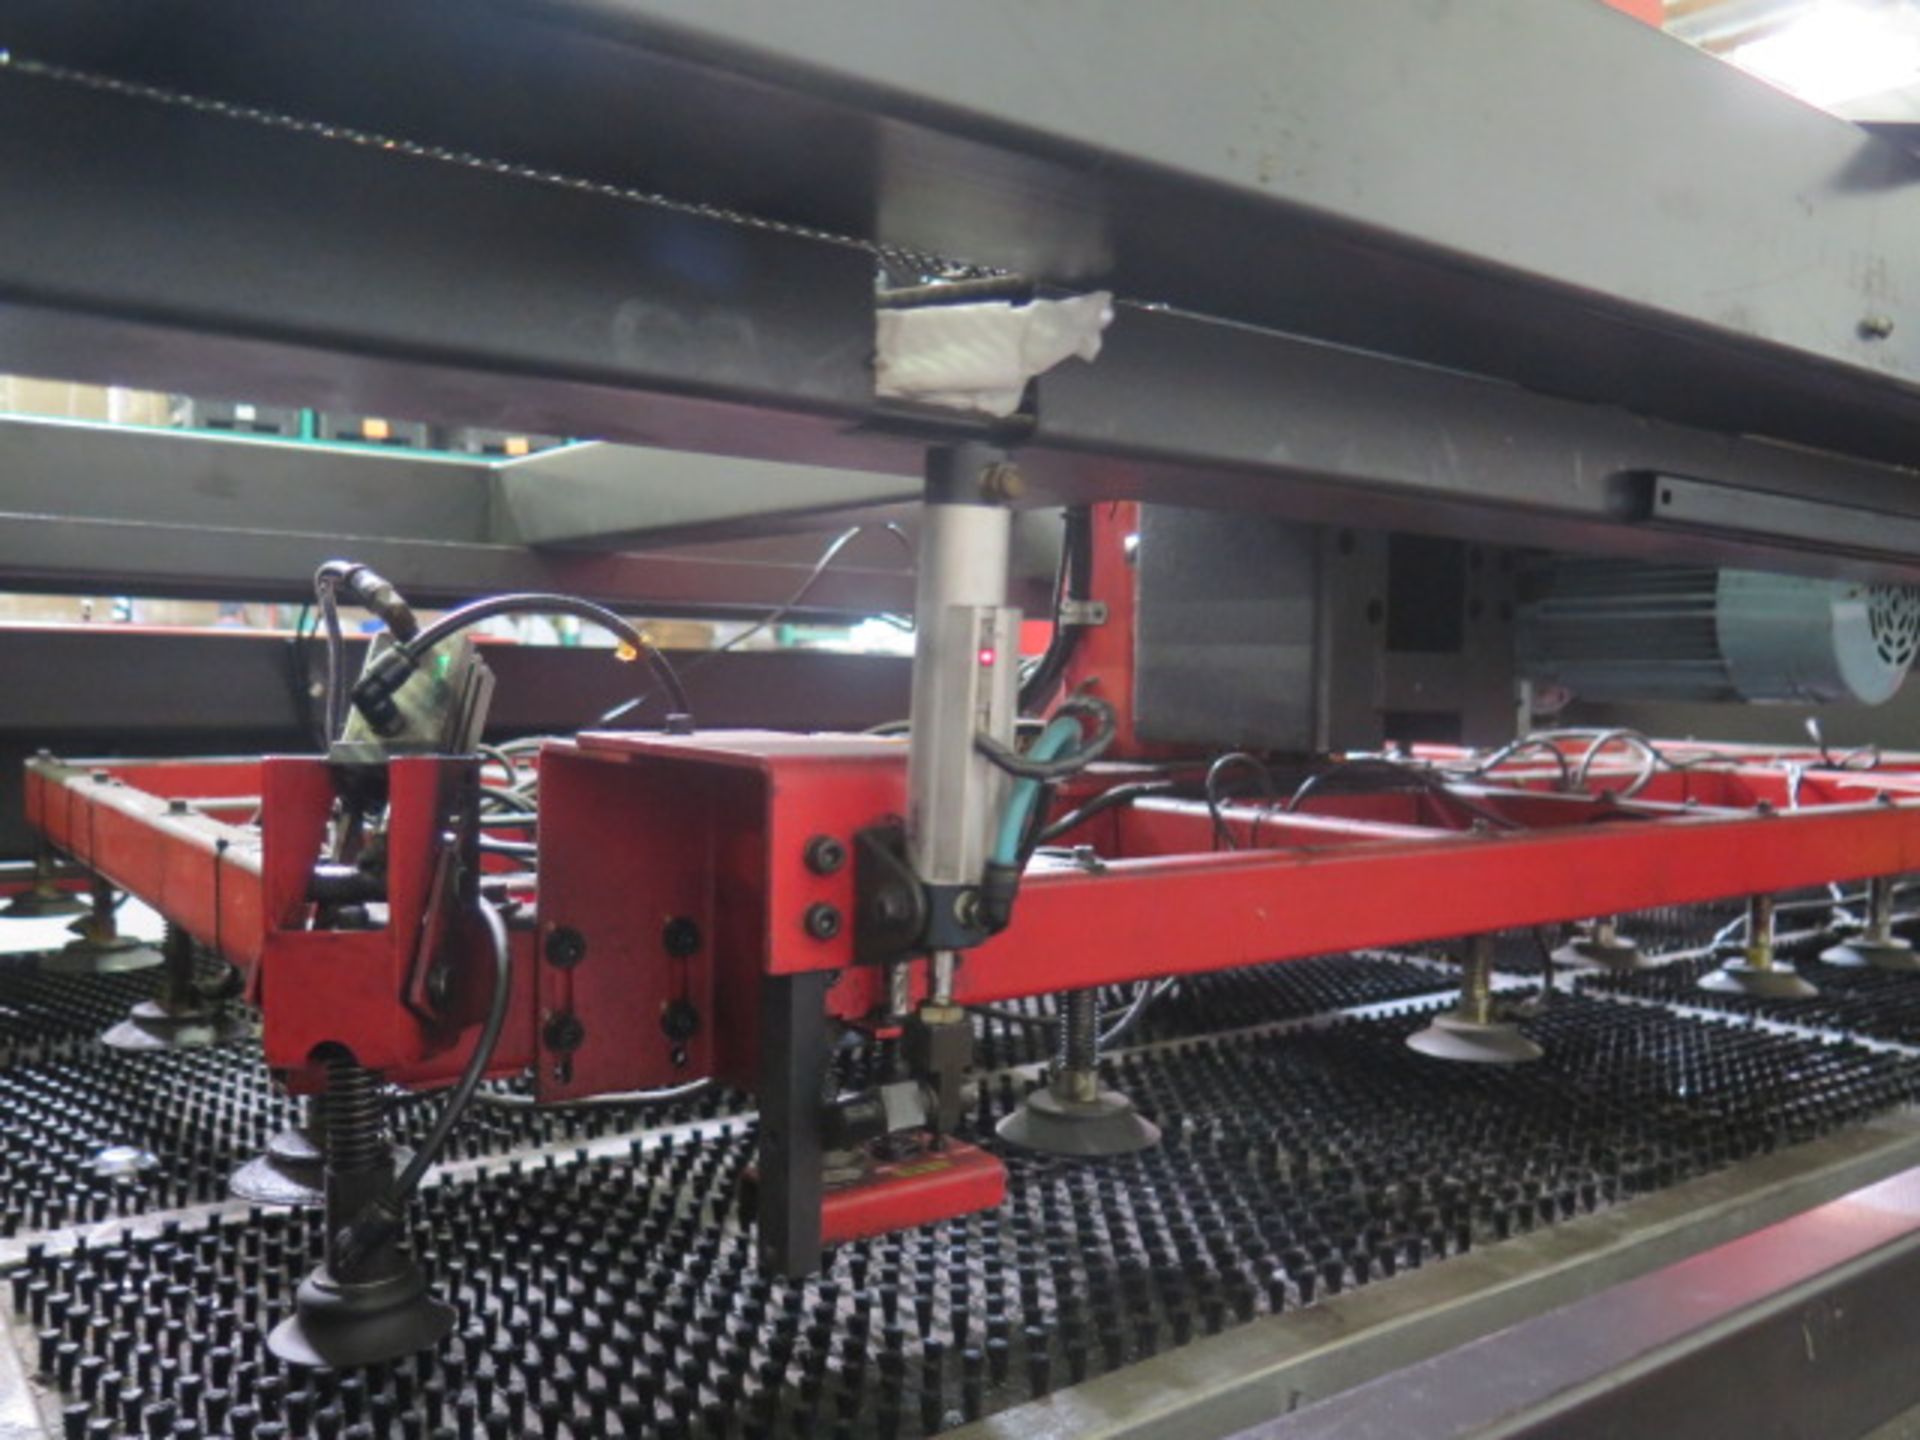 1998 Amada VIPROS 357 QUEEN 30 Ton CNC Turret Punch Press s/n 35730345 w/ O4P-C Controls, SOLD AS IS - Image 26 of 30